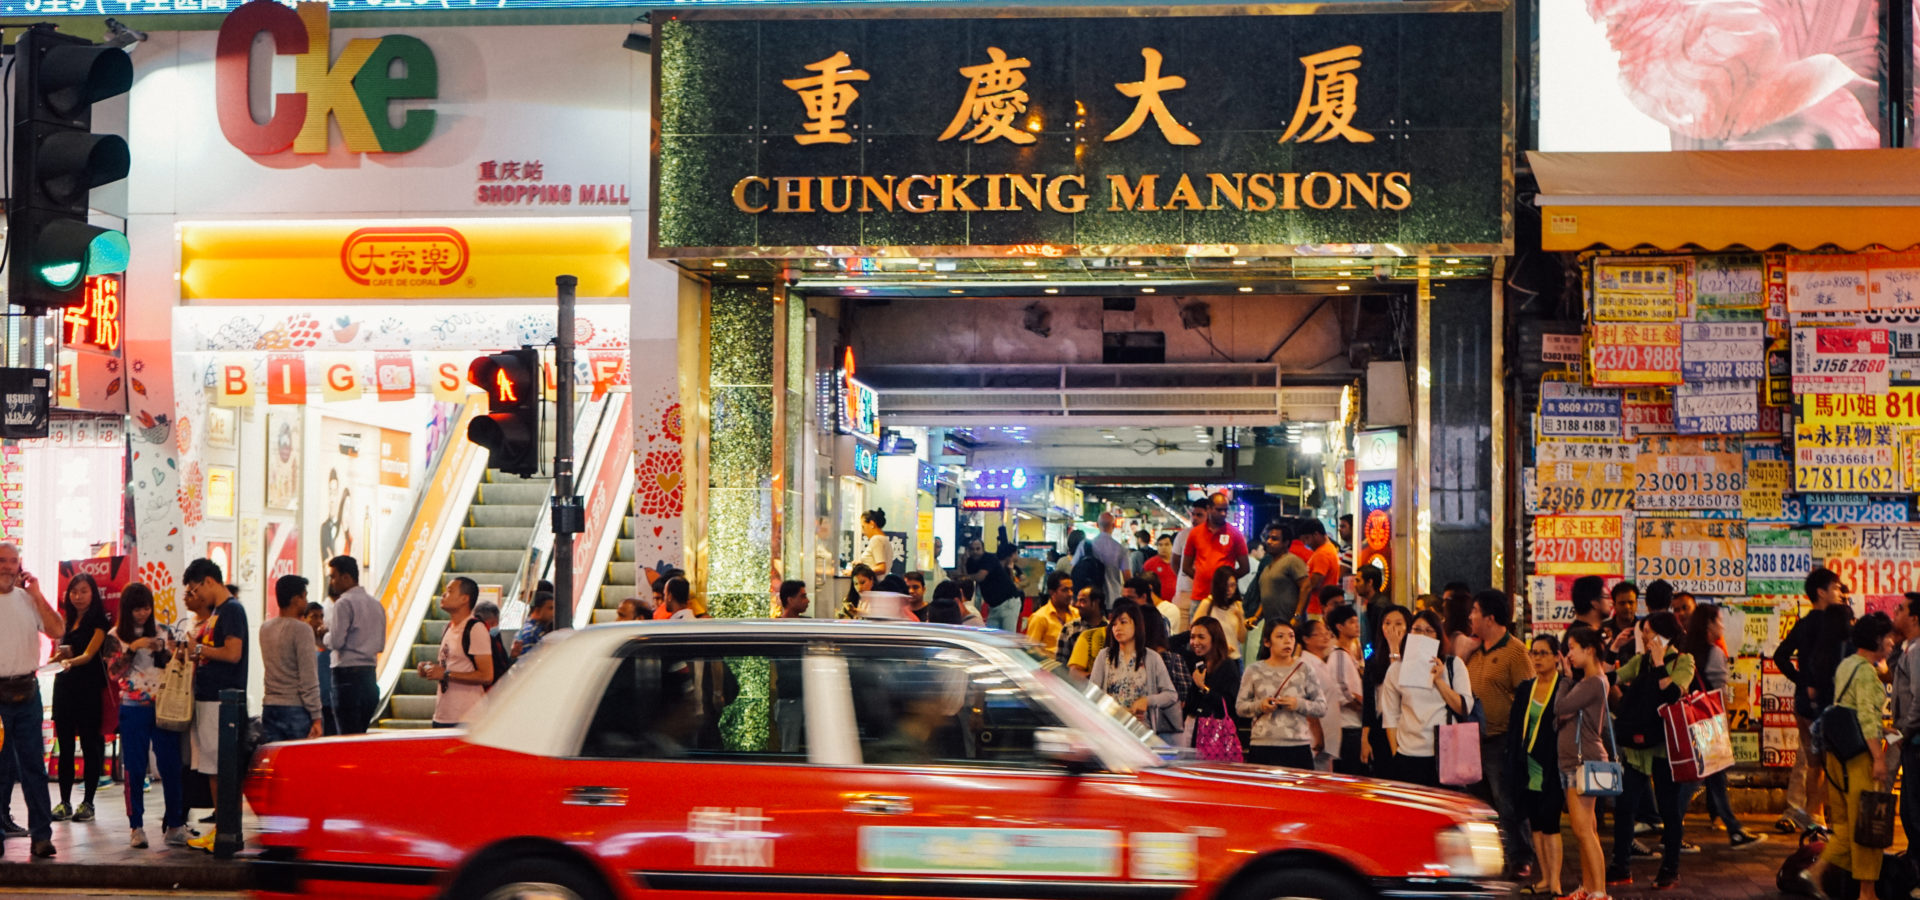 A red taxi drives past tthe busy exterior of the Chungking Mansions in Hong Kong. These squalid, overcrowded towers house many of the territory's 10,000 asylum seekers. (Shadowproof / Zachary Senn)